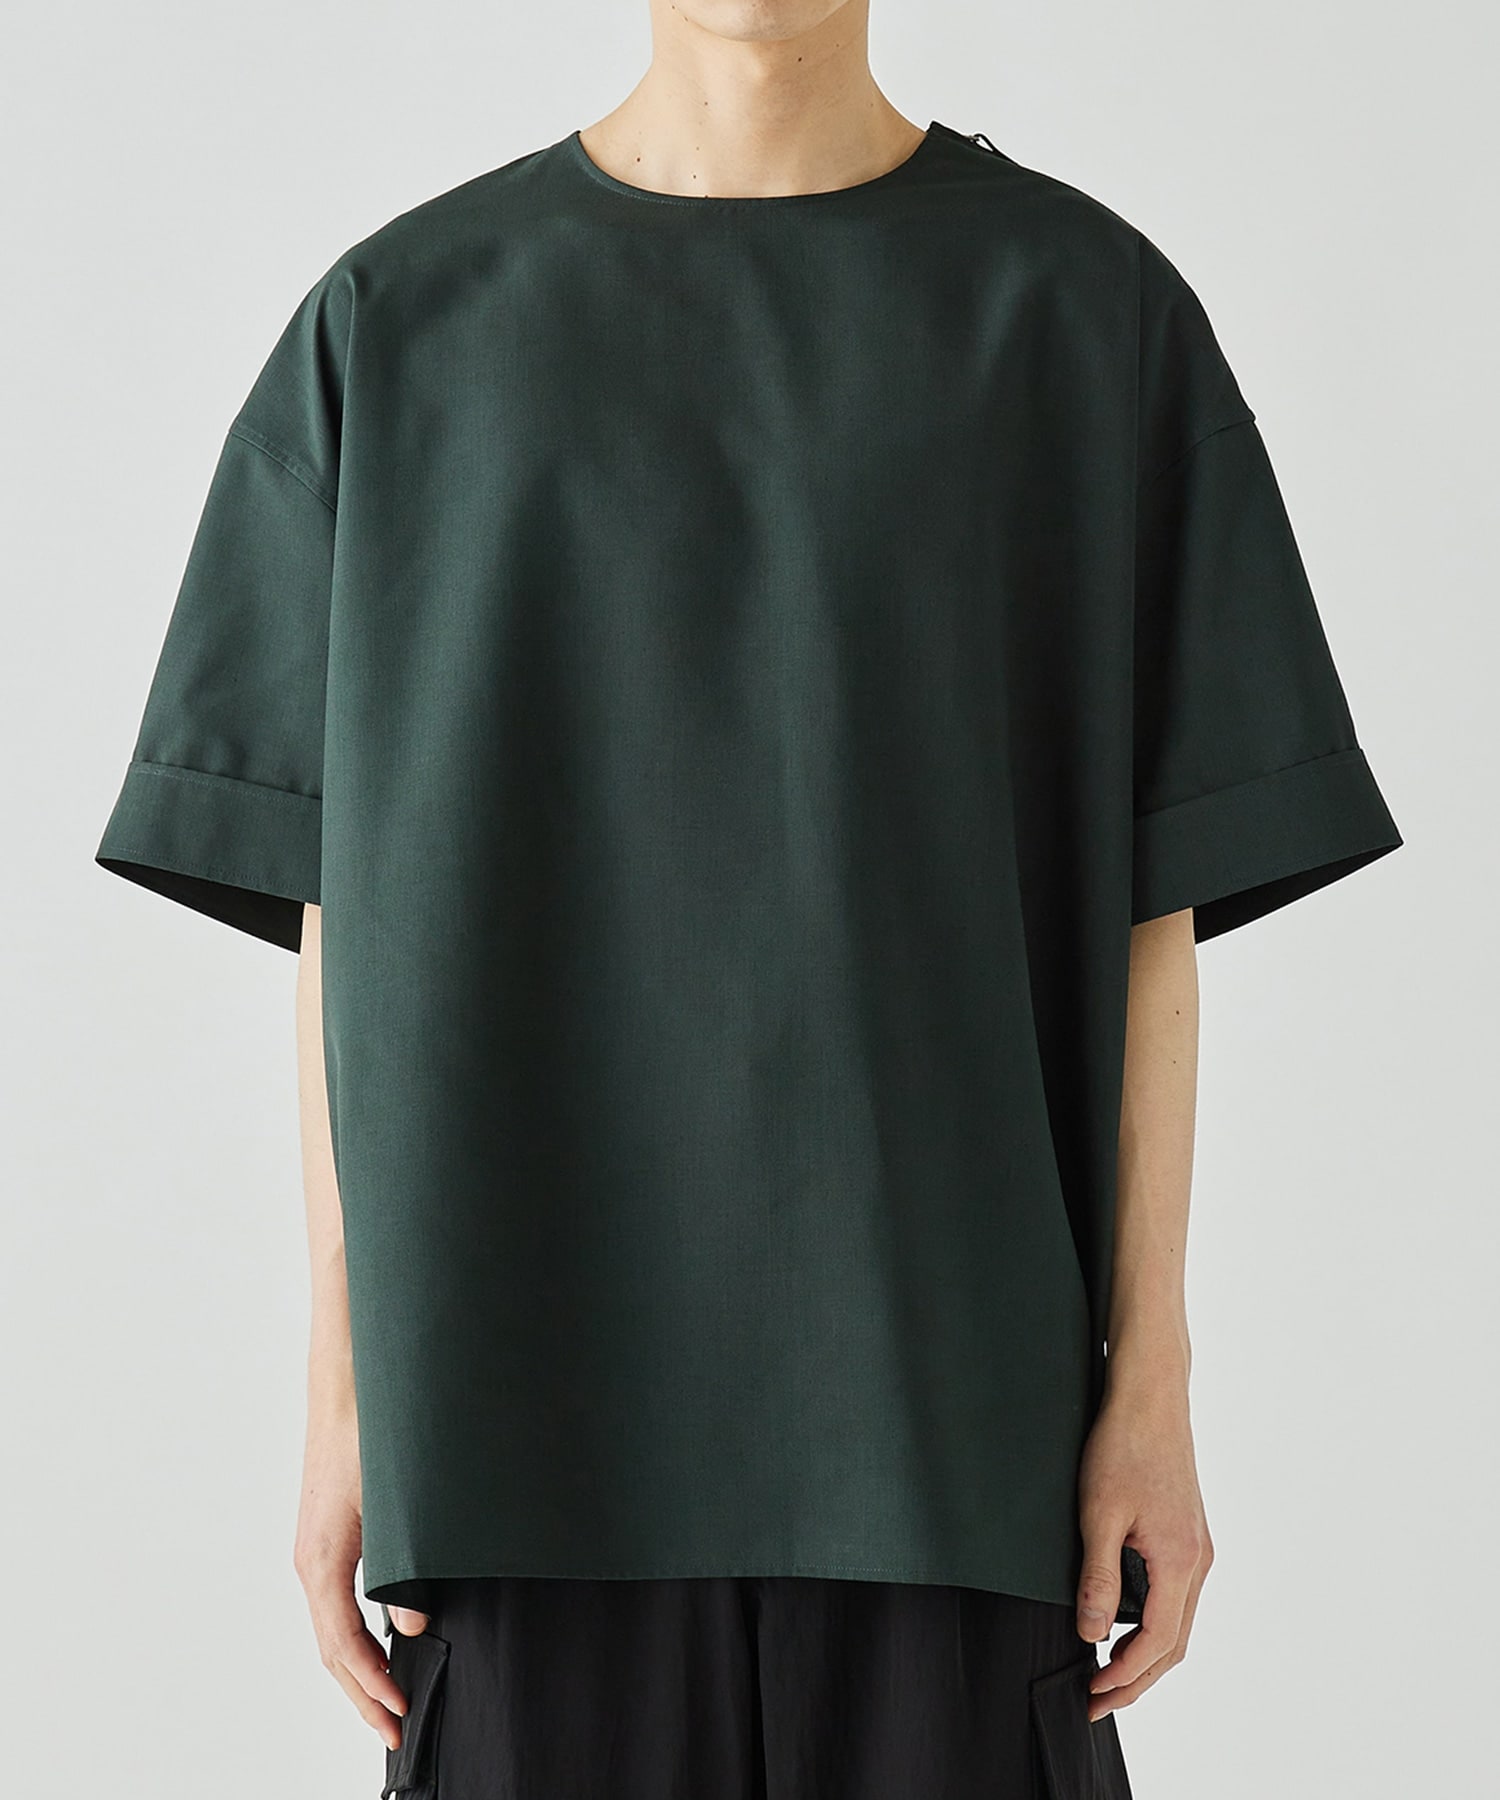 THE SIDE ZIP PULLOVER SHIRT SHORT SLEEVE | UJOH